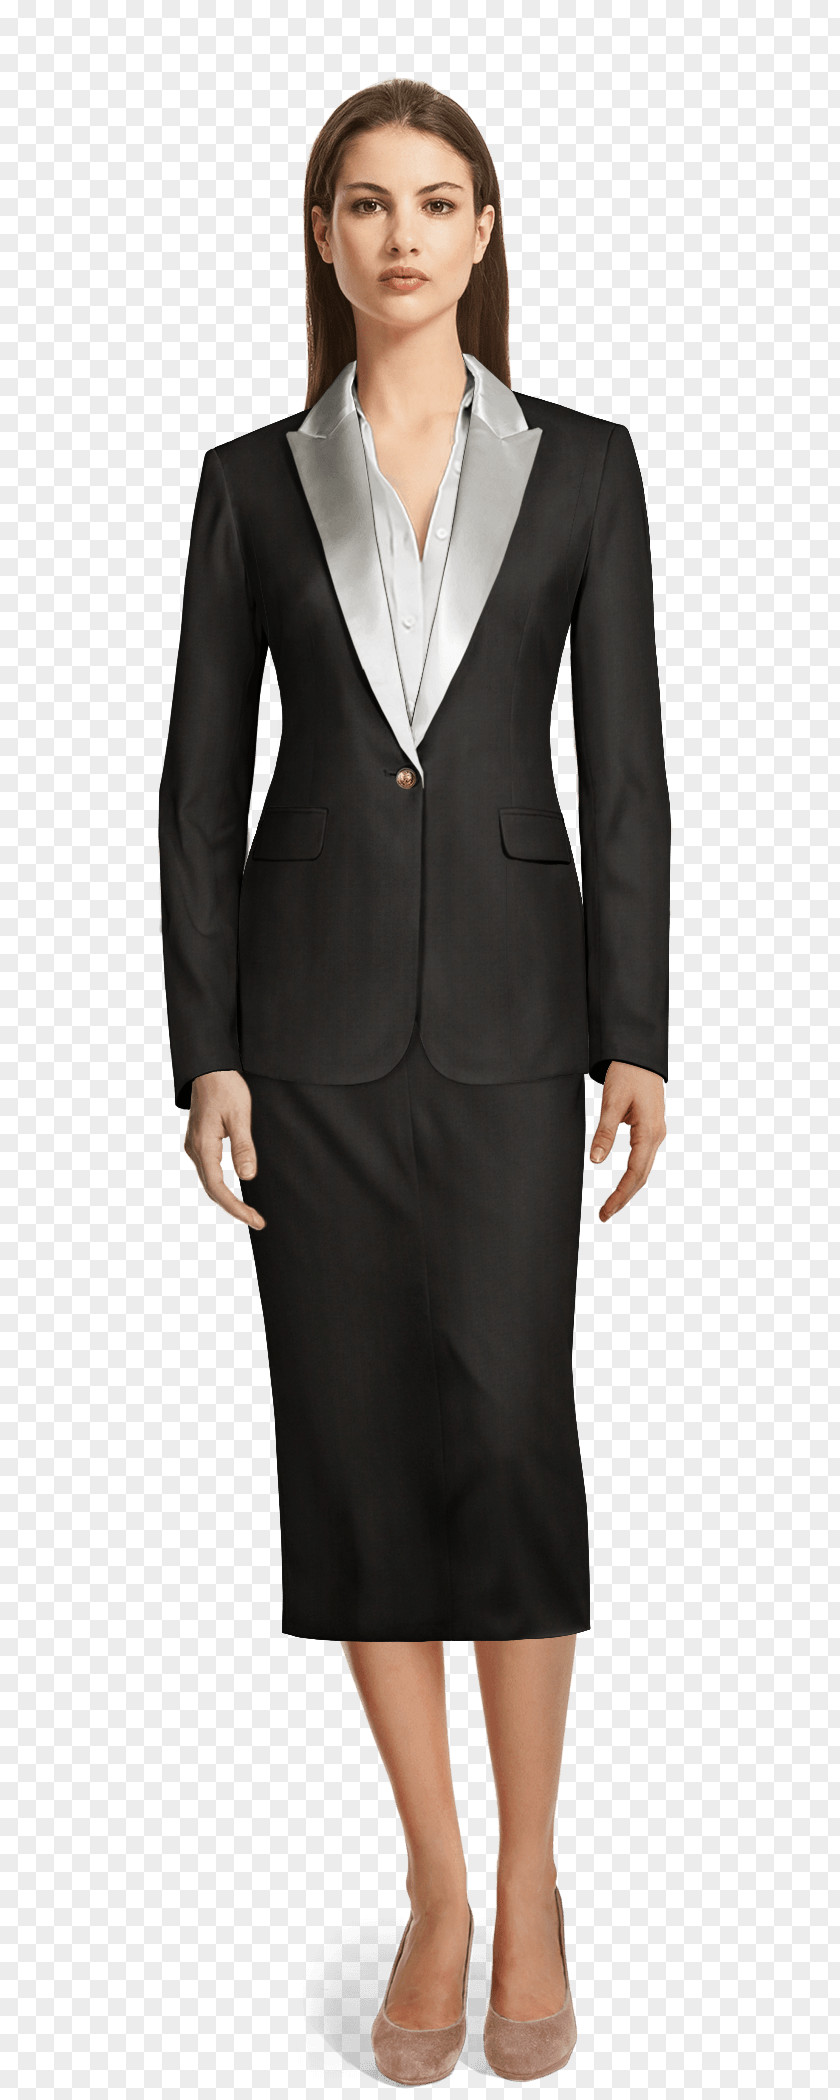 Suit Tuxedo Lapel Double-breasted Single-breasted PNG